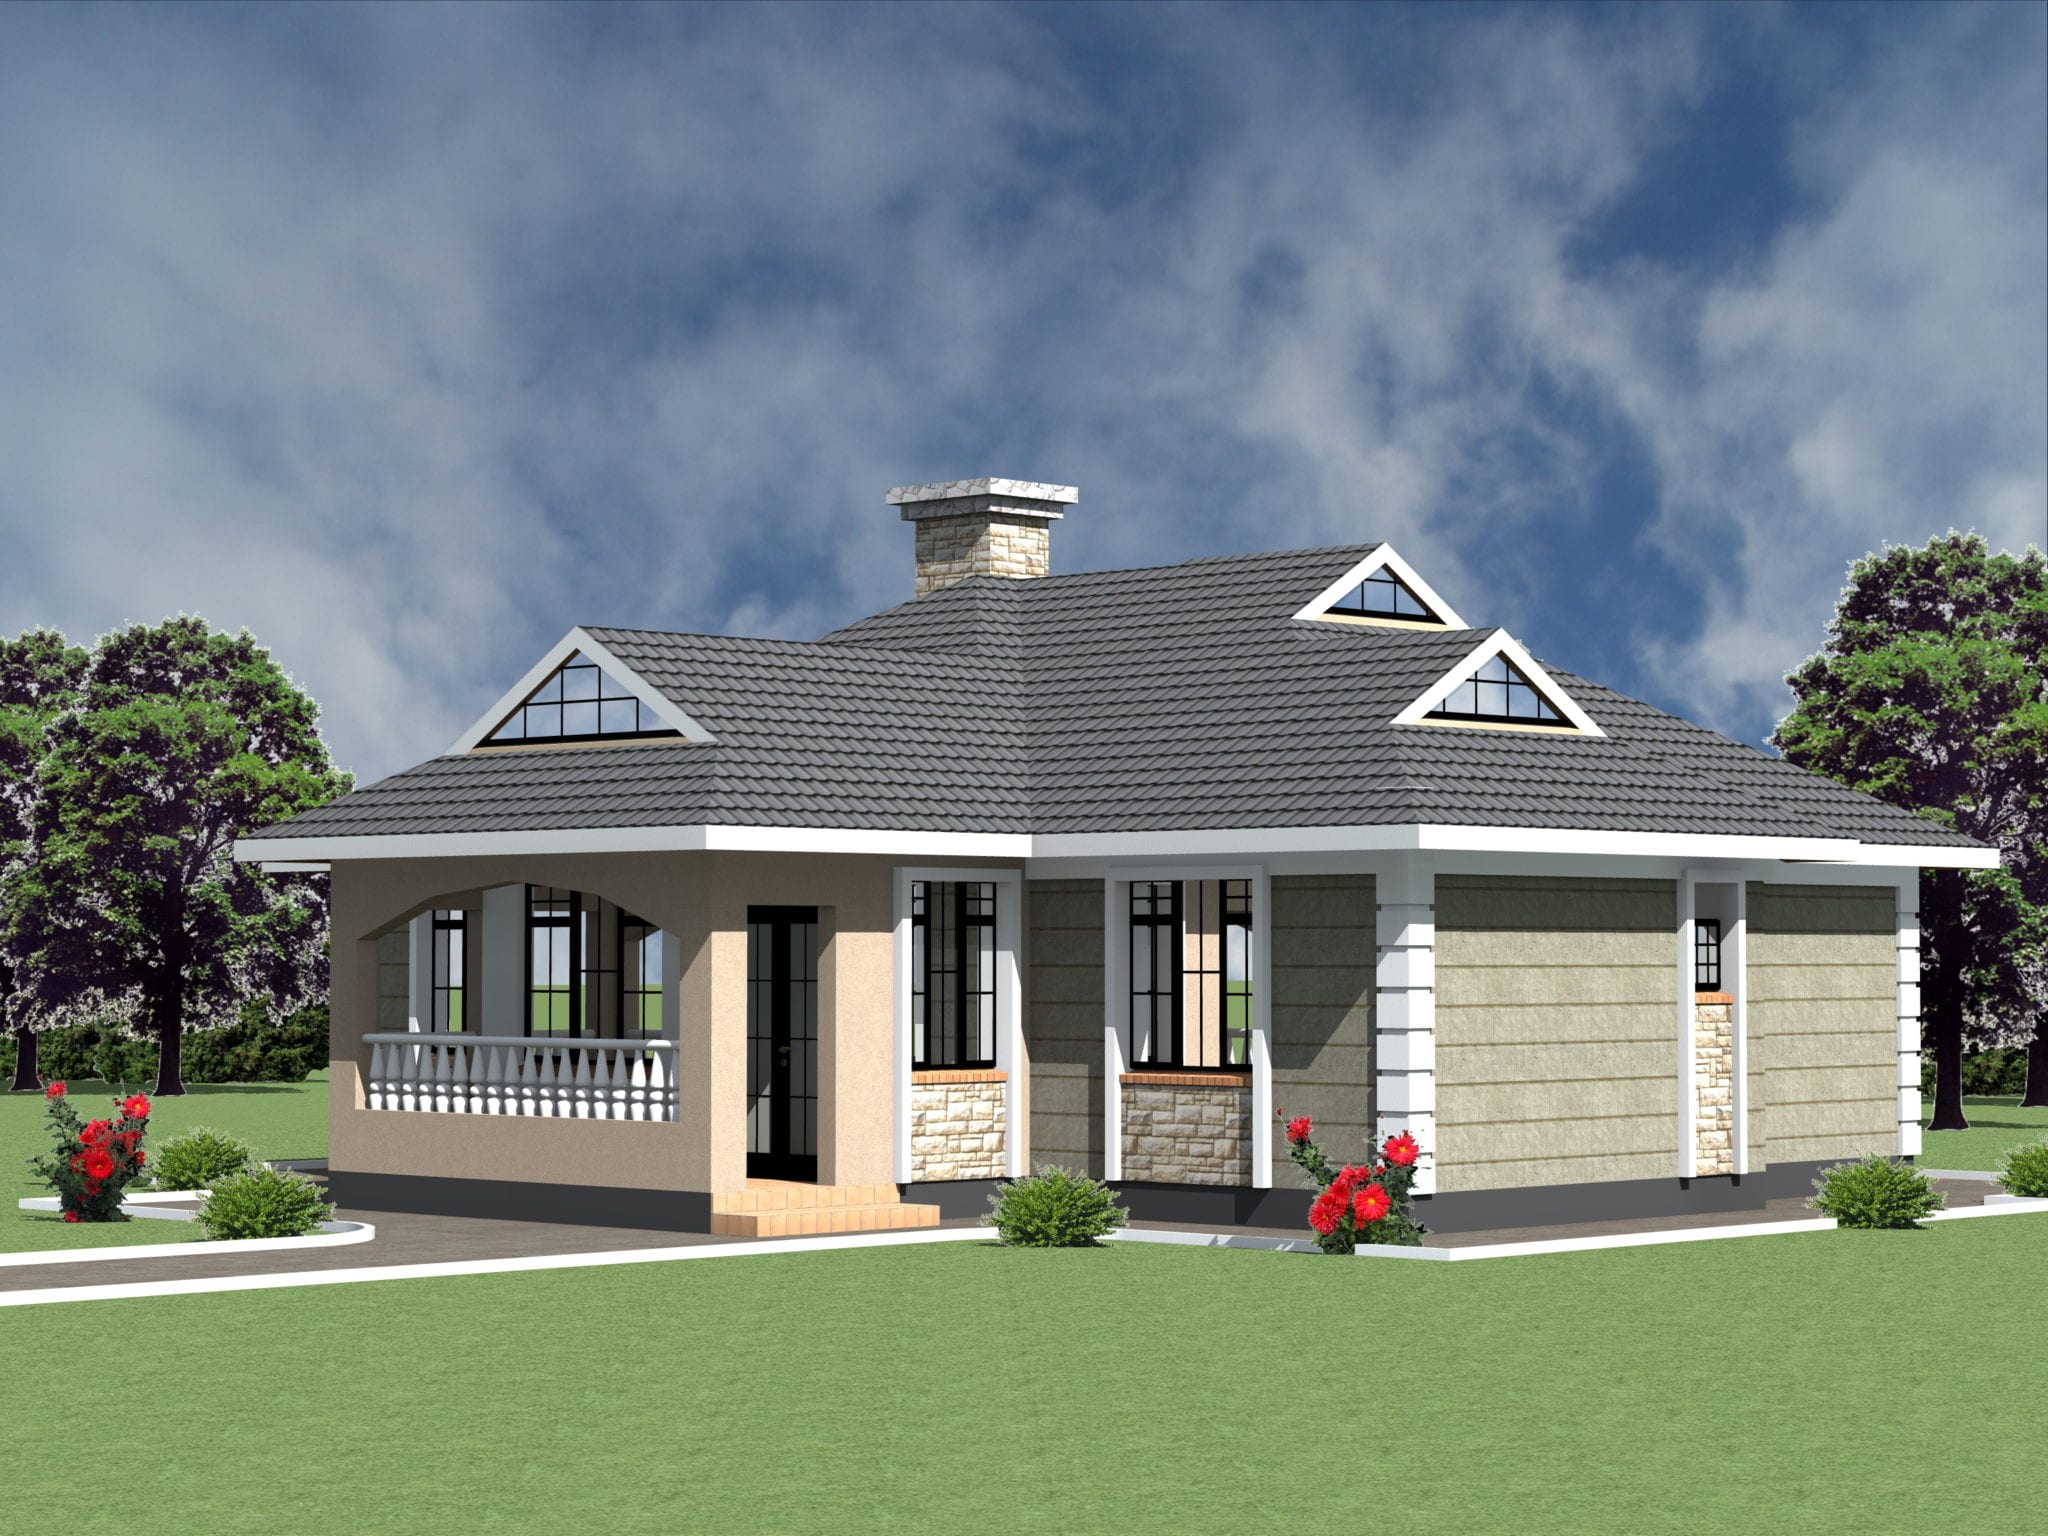 3 bed bungalow designs - Search